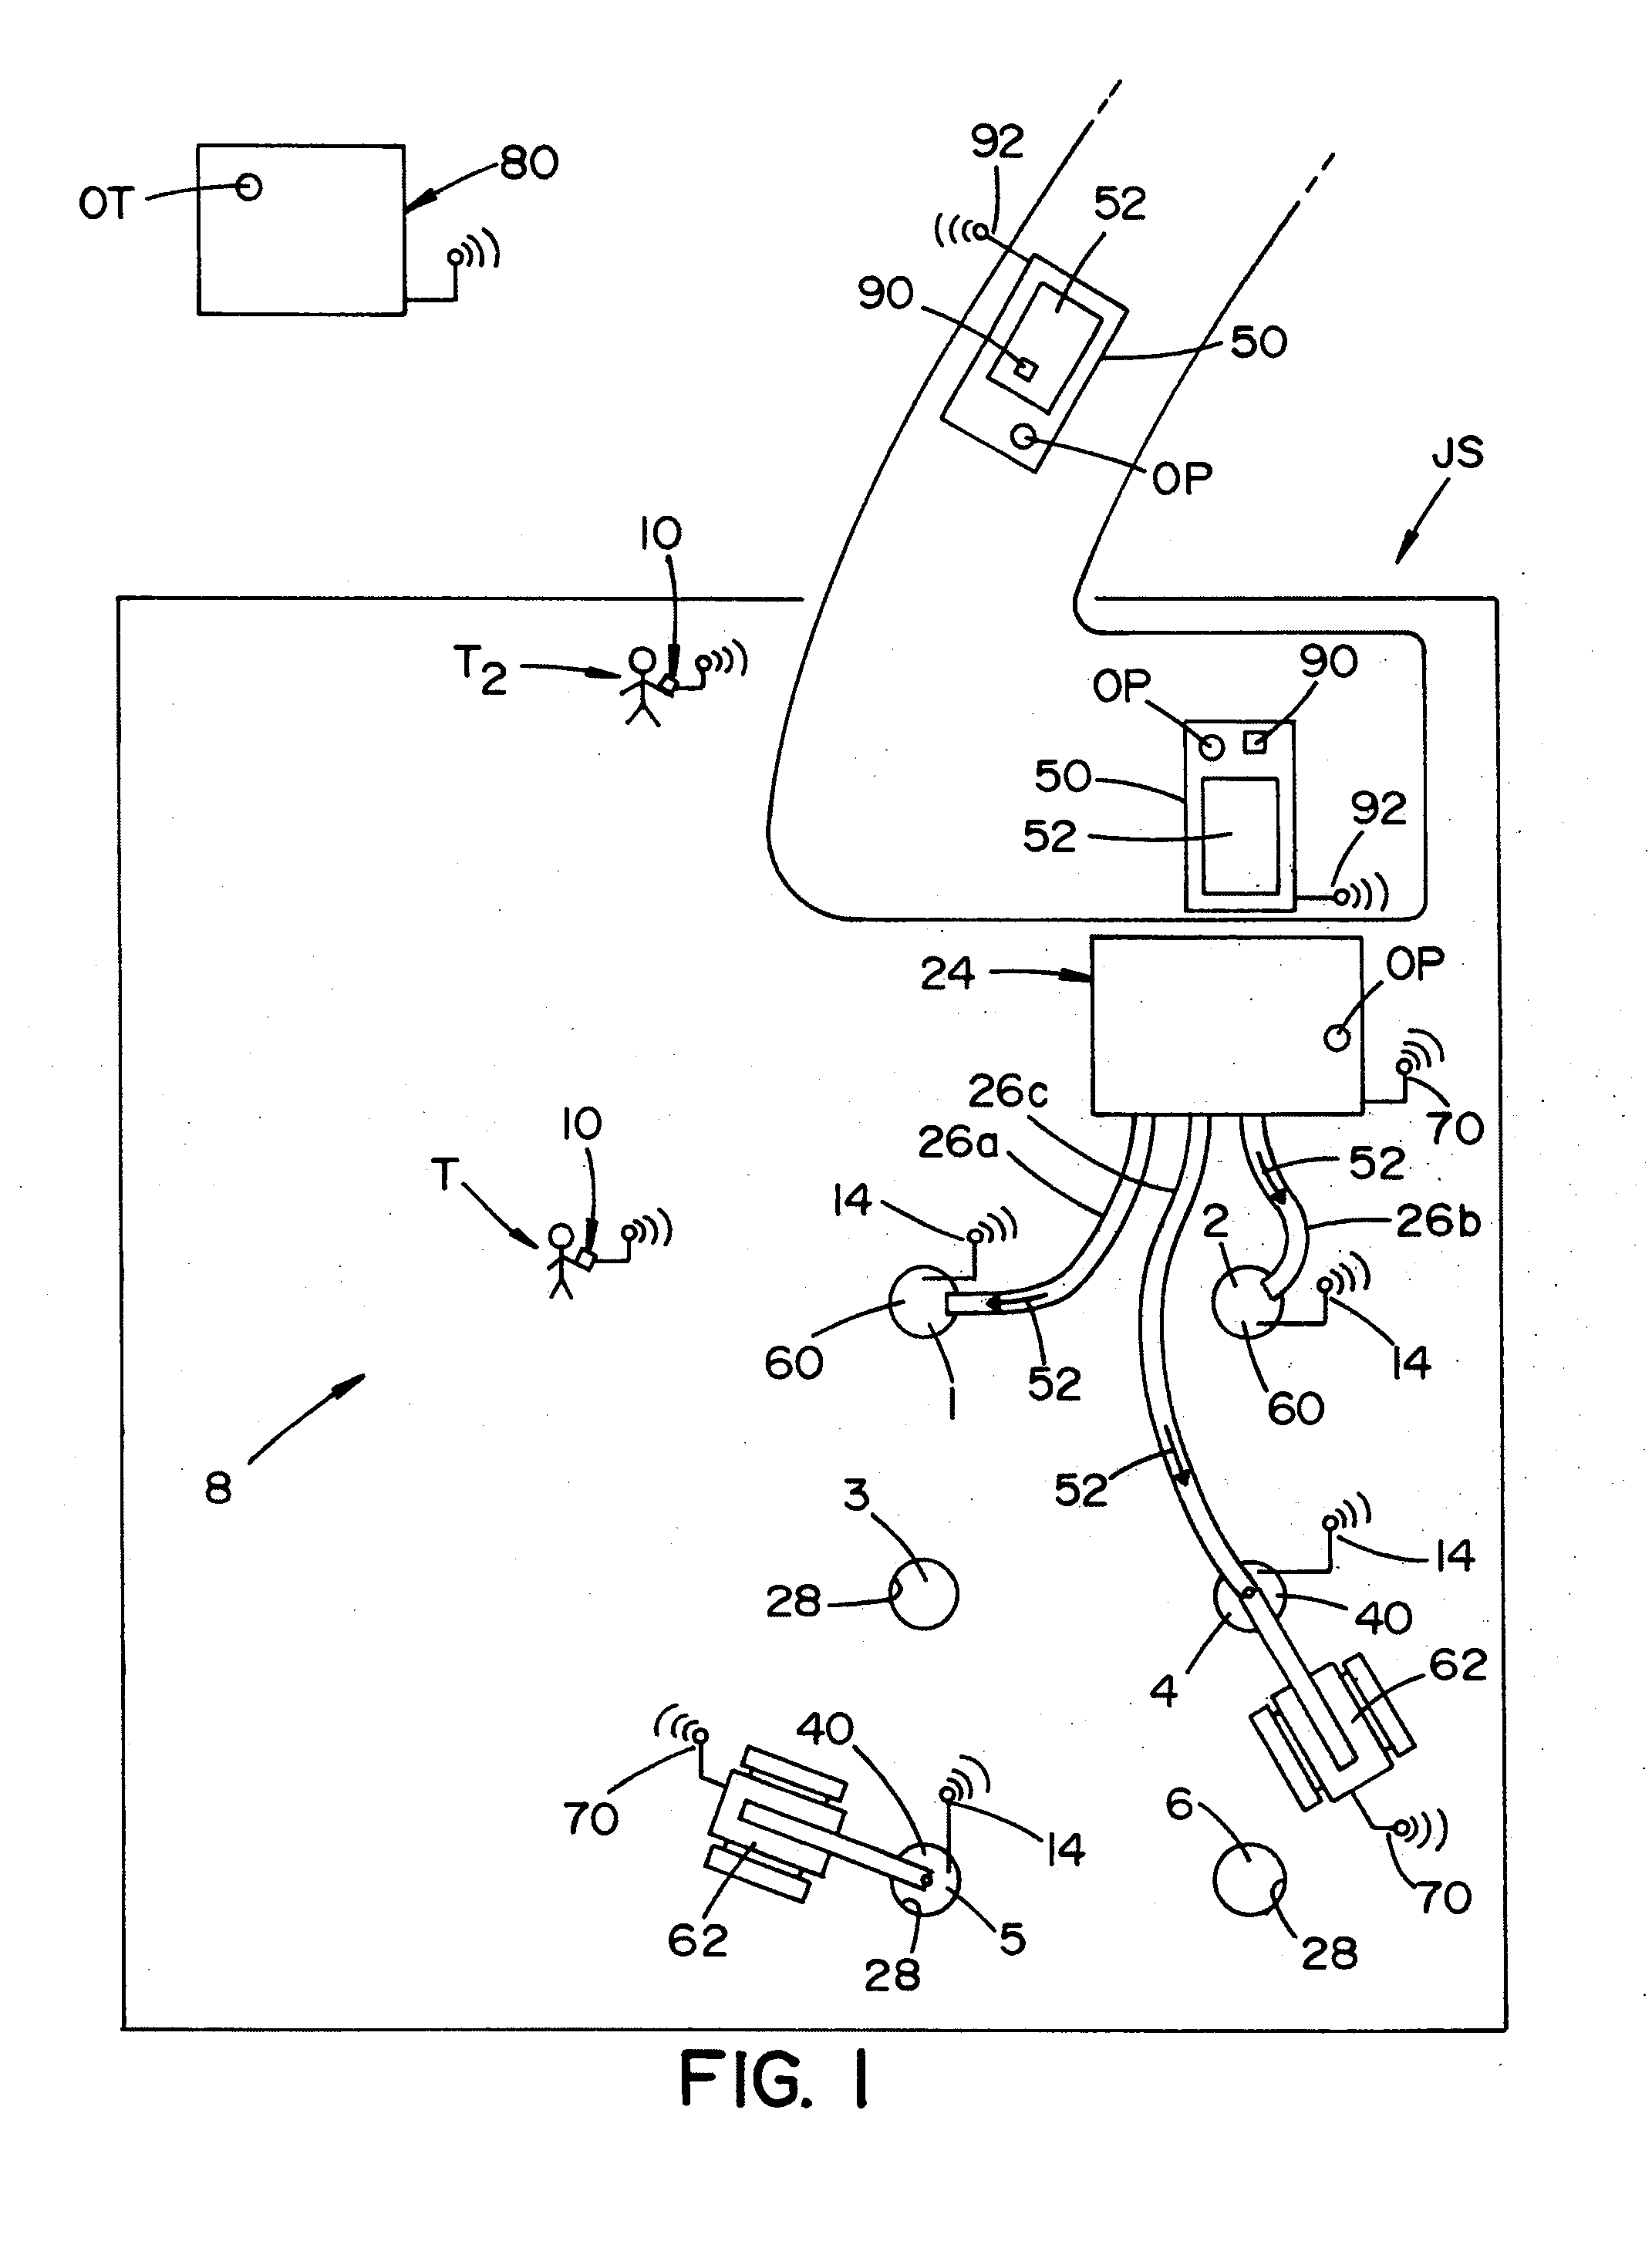 Pile installation and monitoring system and method of using the same